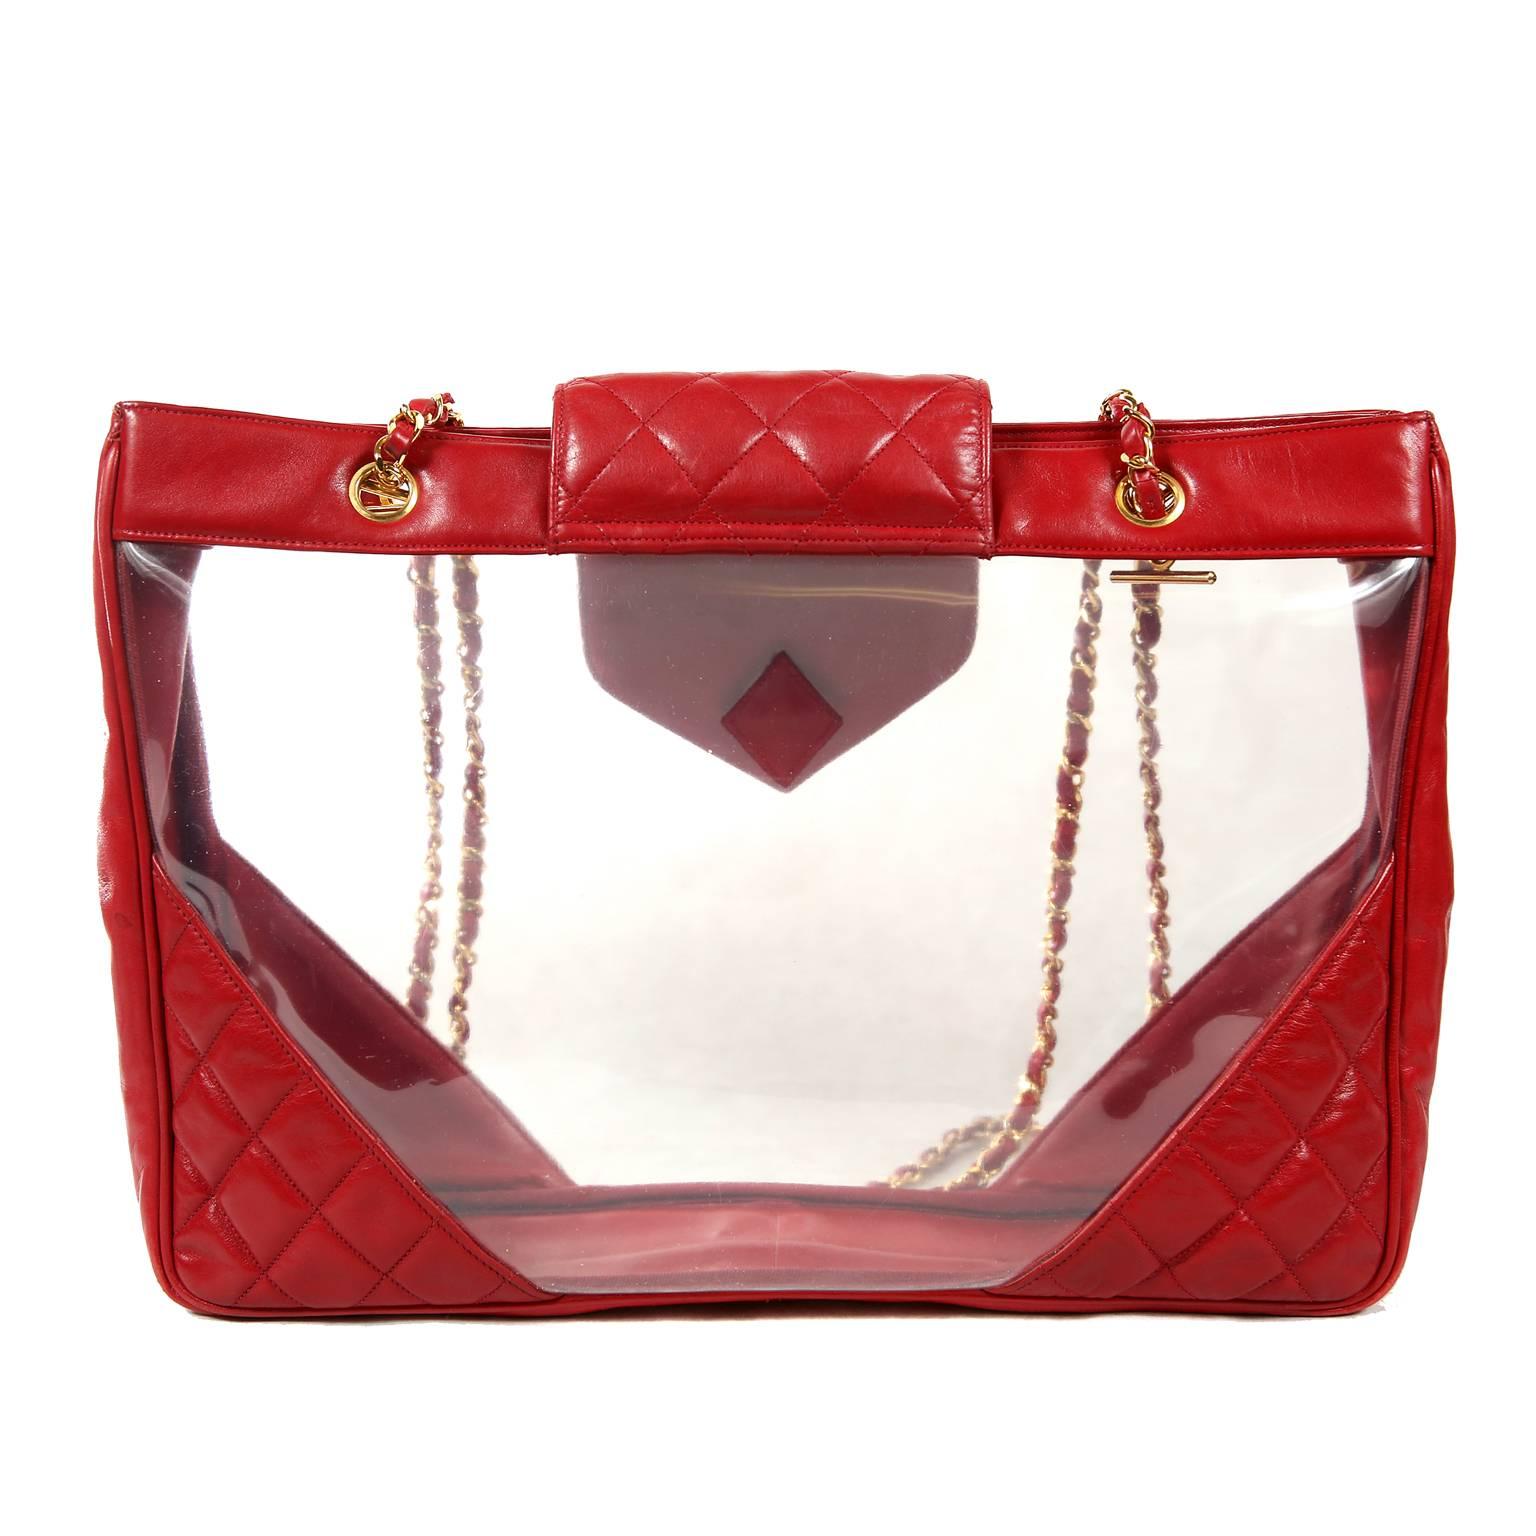 Chanel Vintage Clear PVC and Red Leather XL Tote- MINT condition
A very rare find, this stylish tote is truly timeless.  In fact, clear bags are in high demand among fashionistas this season.
Clear PVC extra large tote is framed with bright red